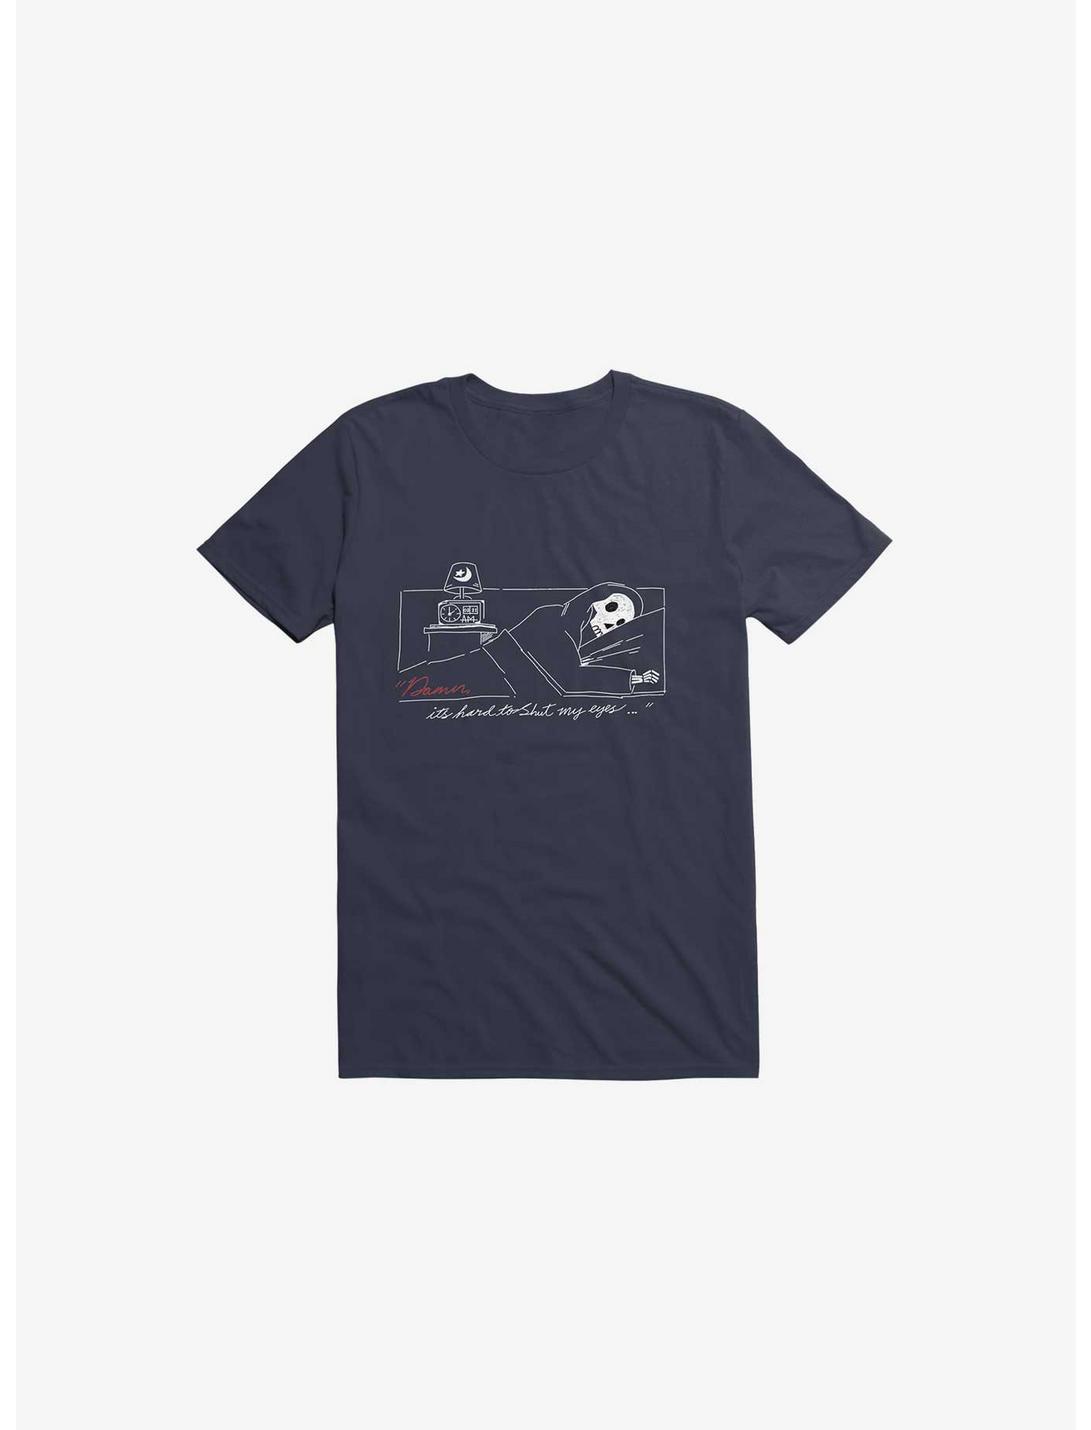 Damn, Sleepy Time Is Out T-Shirt, NAVY, hi-res